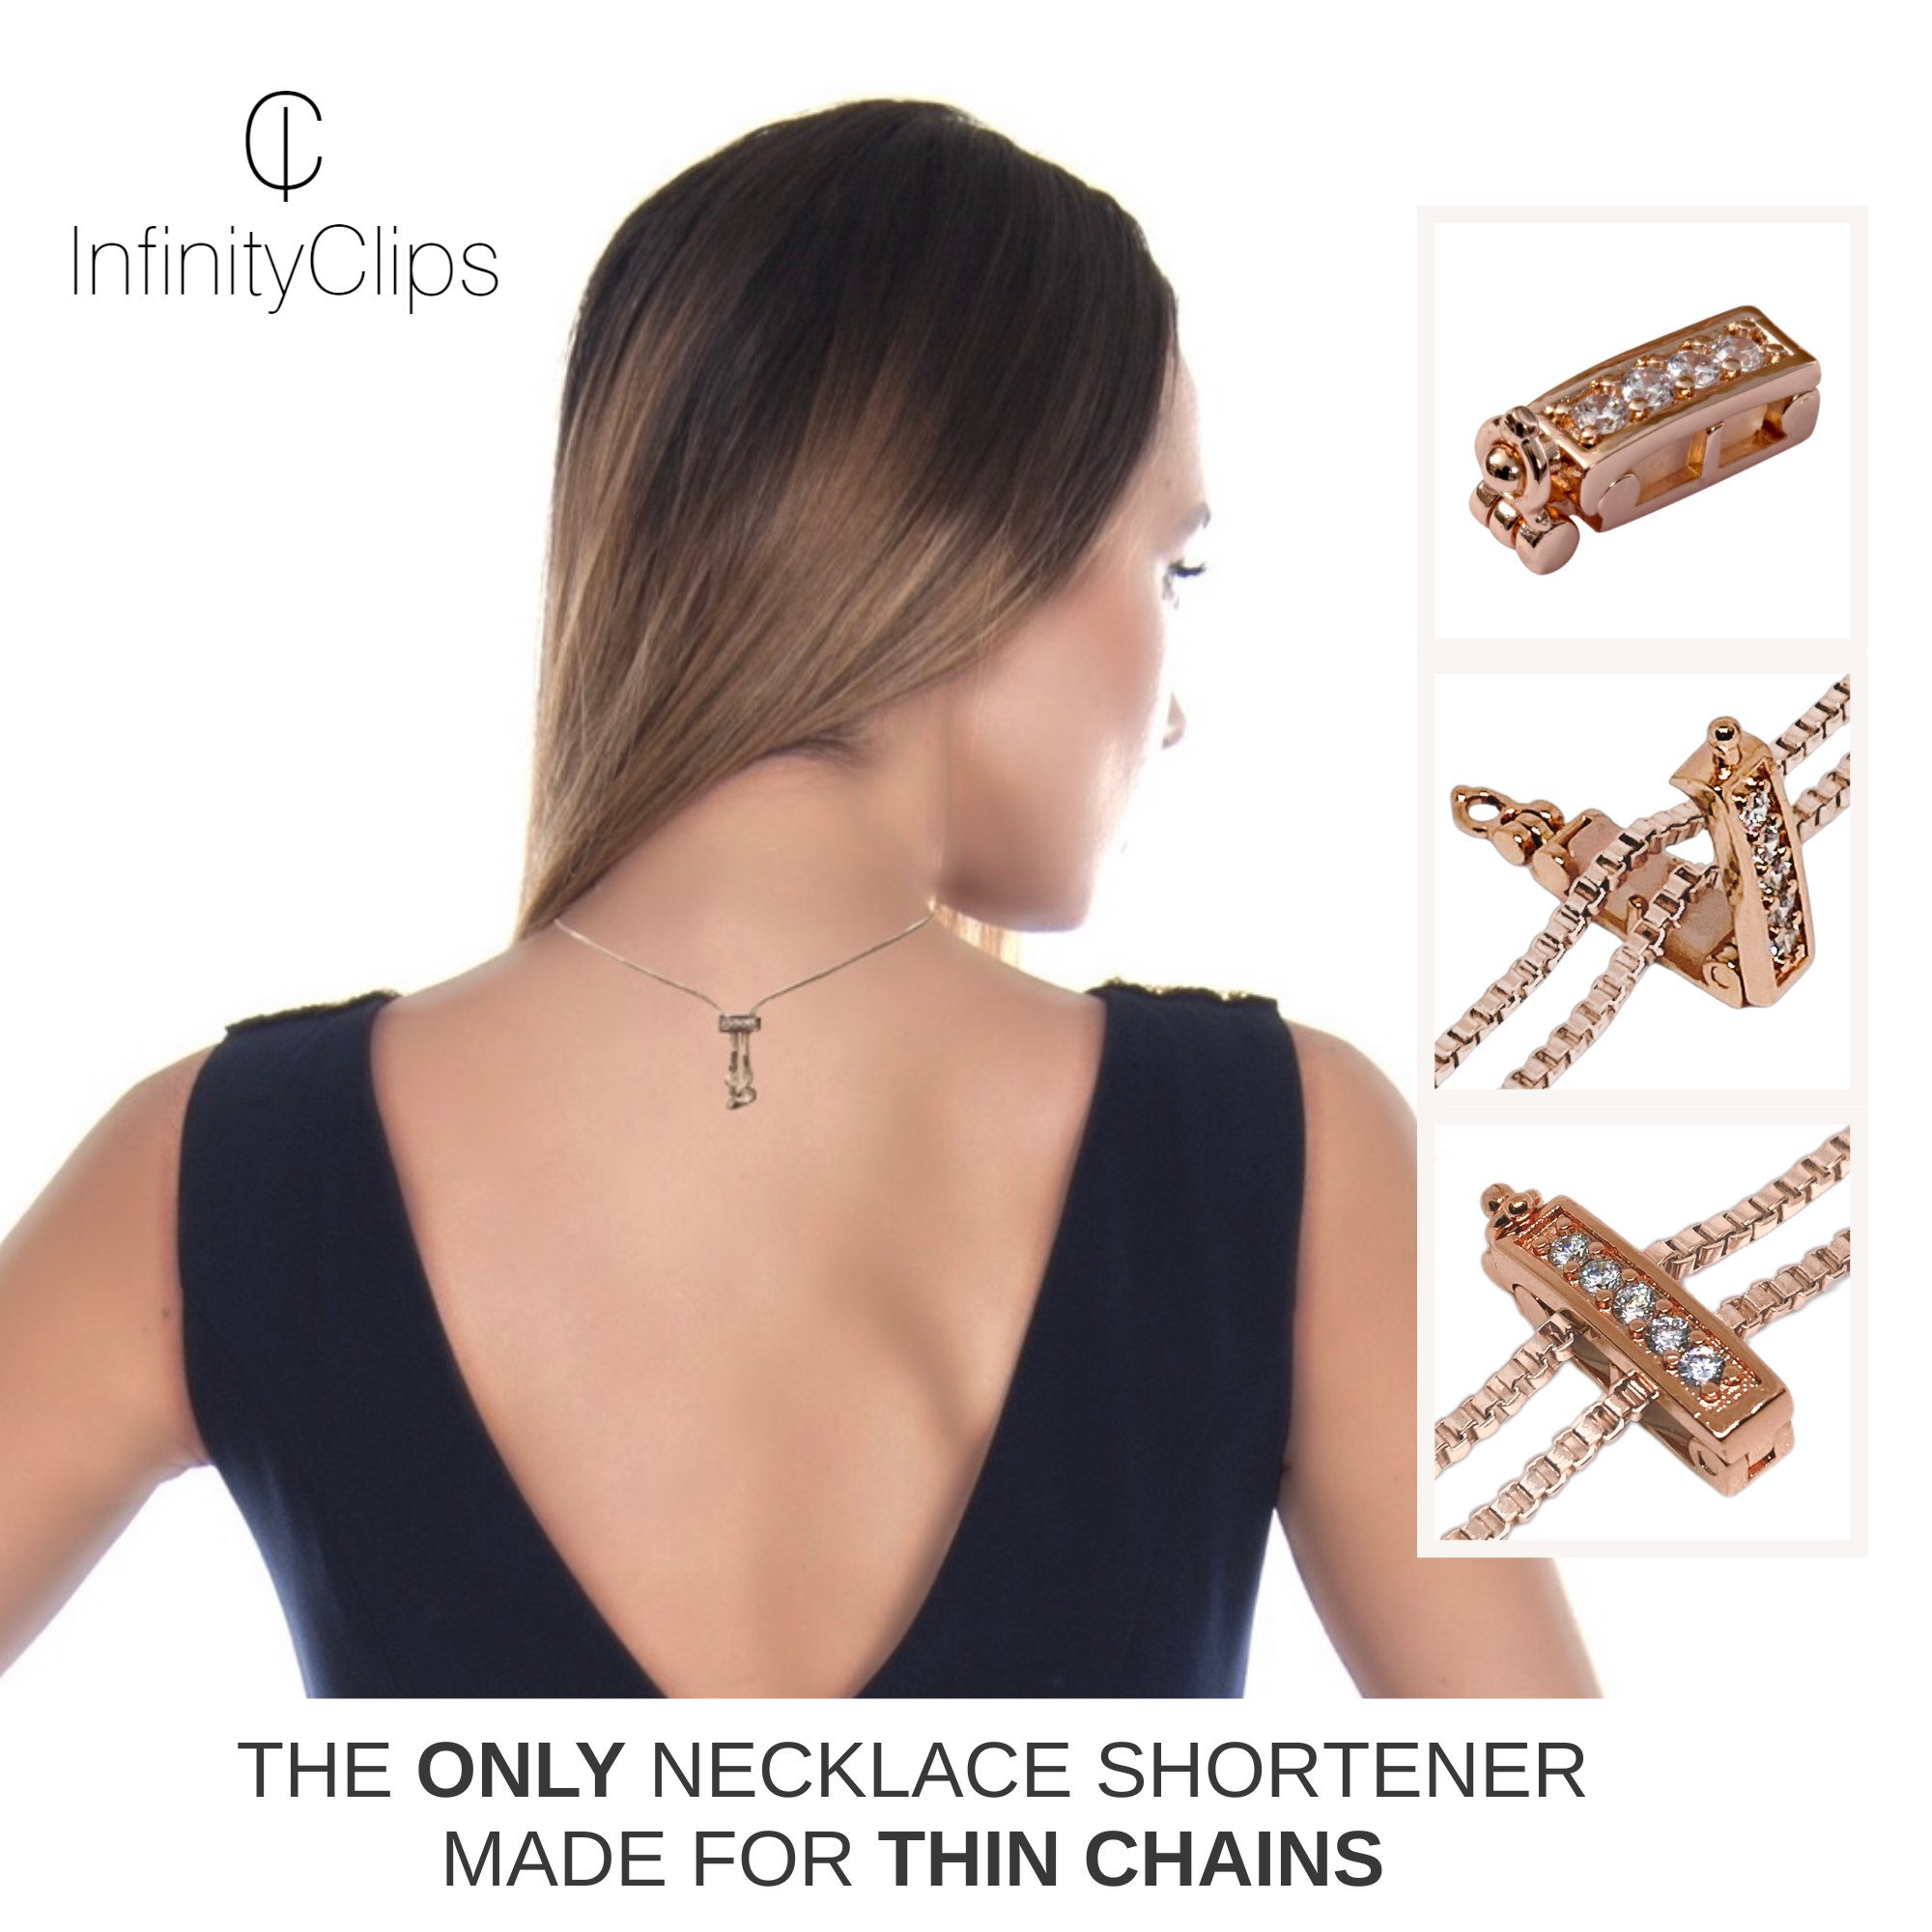 Infinity Clips Necklace Shortener, Large Rose Gold W/ Security Clasp, Chain  Shortener, Clasp for Necklace, Necklace Shorten 